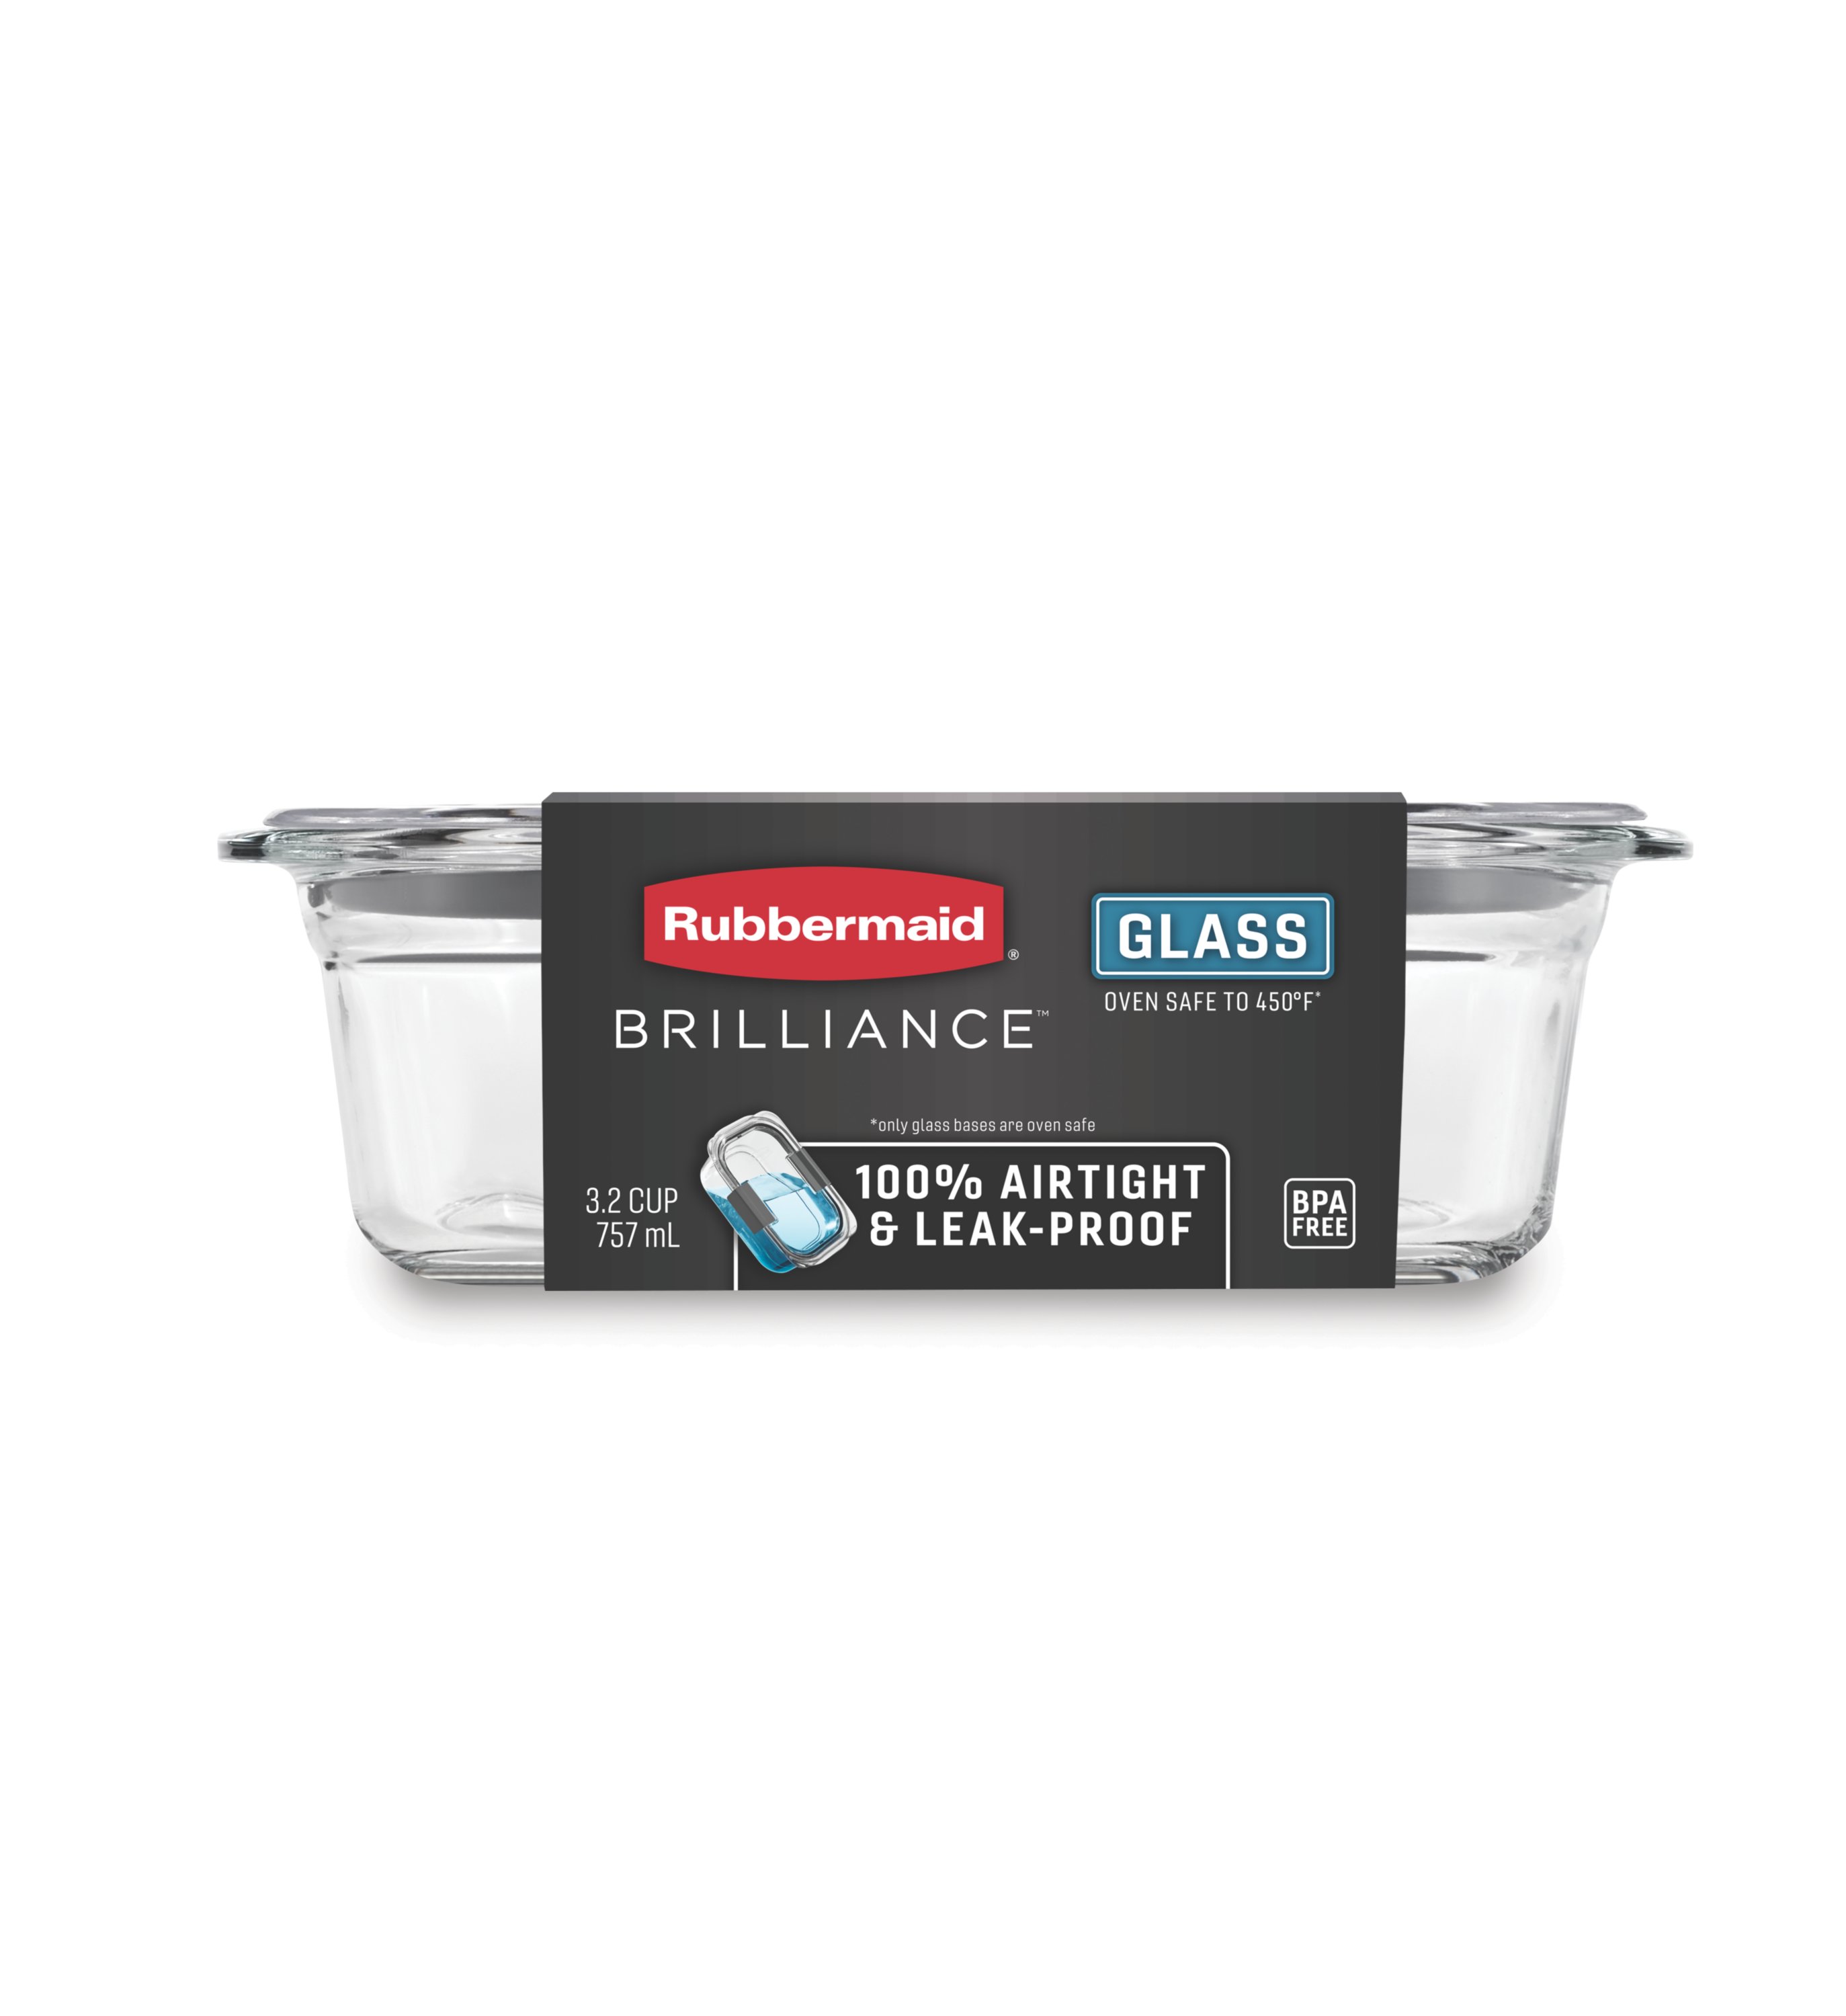 https://s7d9.scene7.com/is/image/NewellRubbermaid/2118320-rubbermaid-food-storage-brilliance-glass-clear-3.2c-in-pack-straight-on